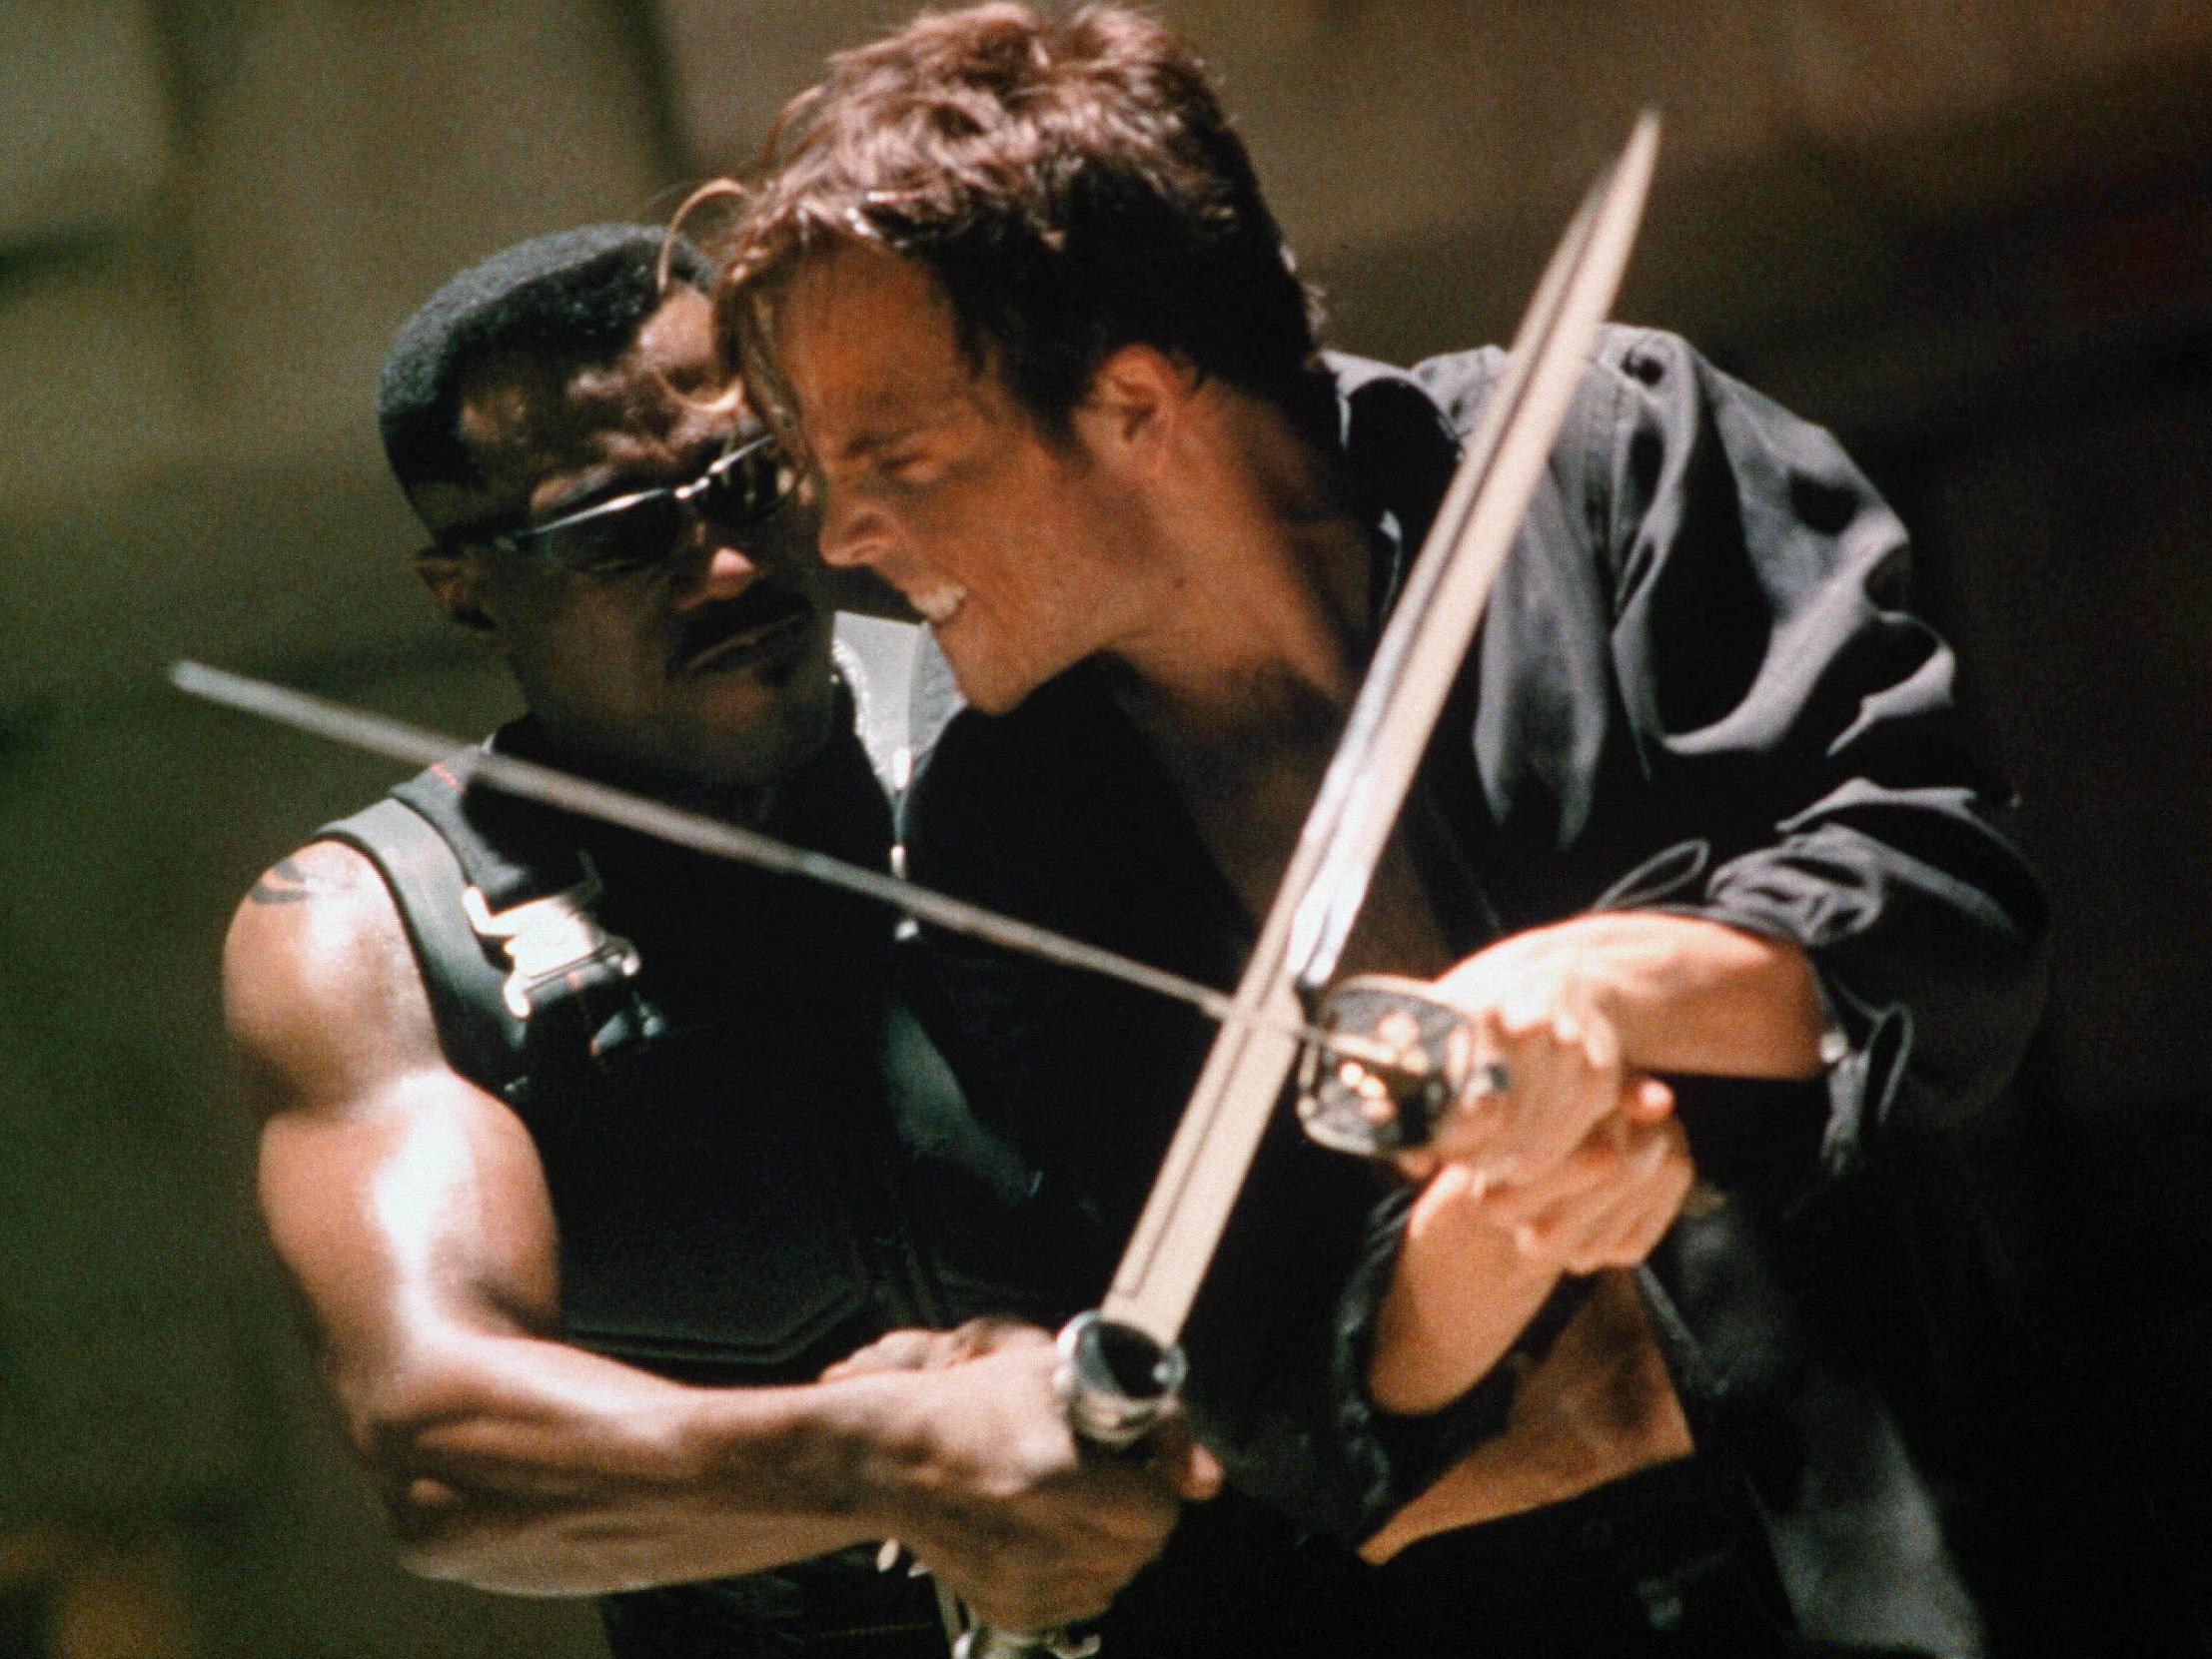 Snipes and Stephen Dorff in ‘Blade’